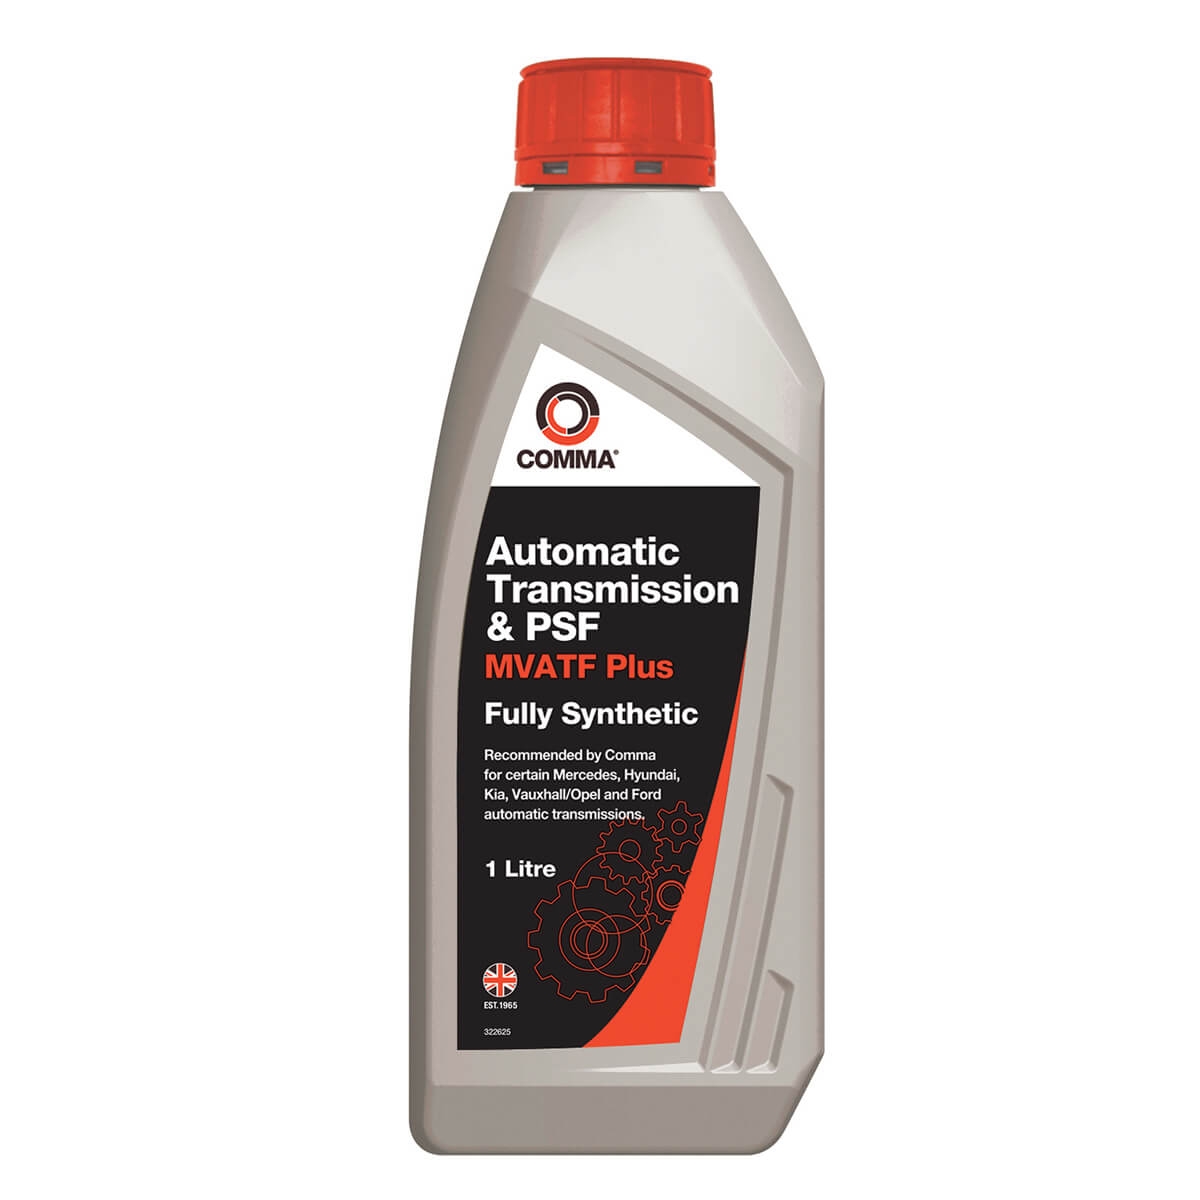 VAUXHALL AND OPEL ARENA Steering Gear Oil